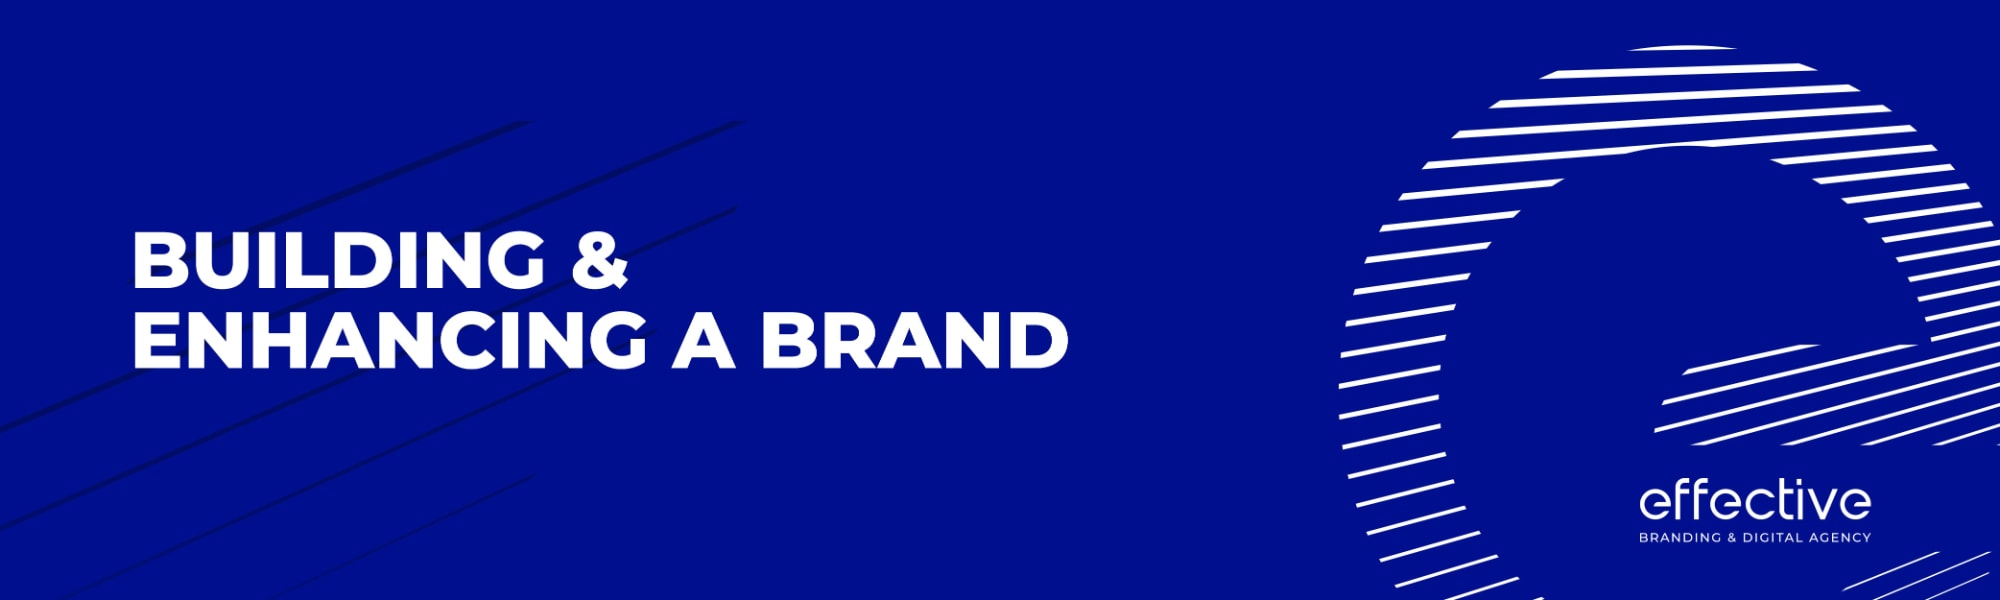 Building and Enhancing a Brand